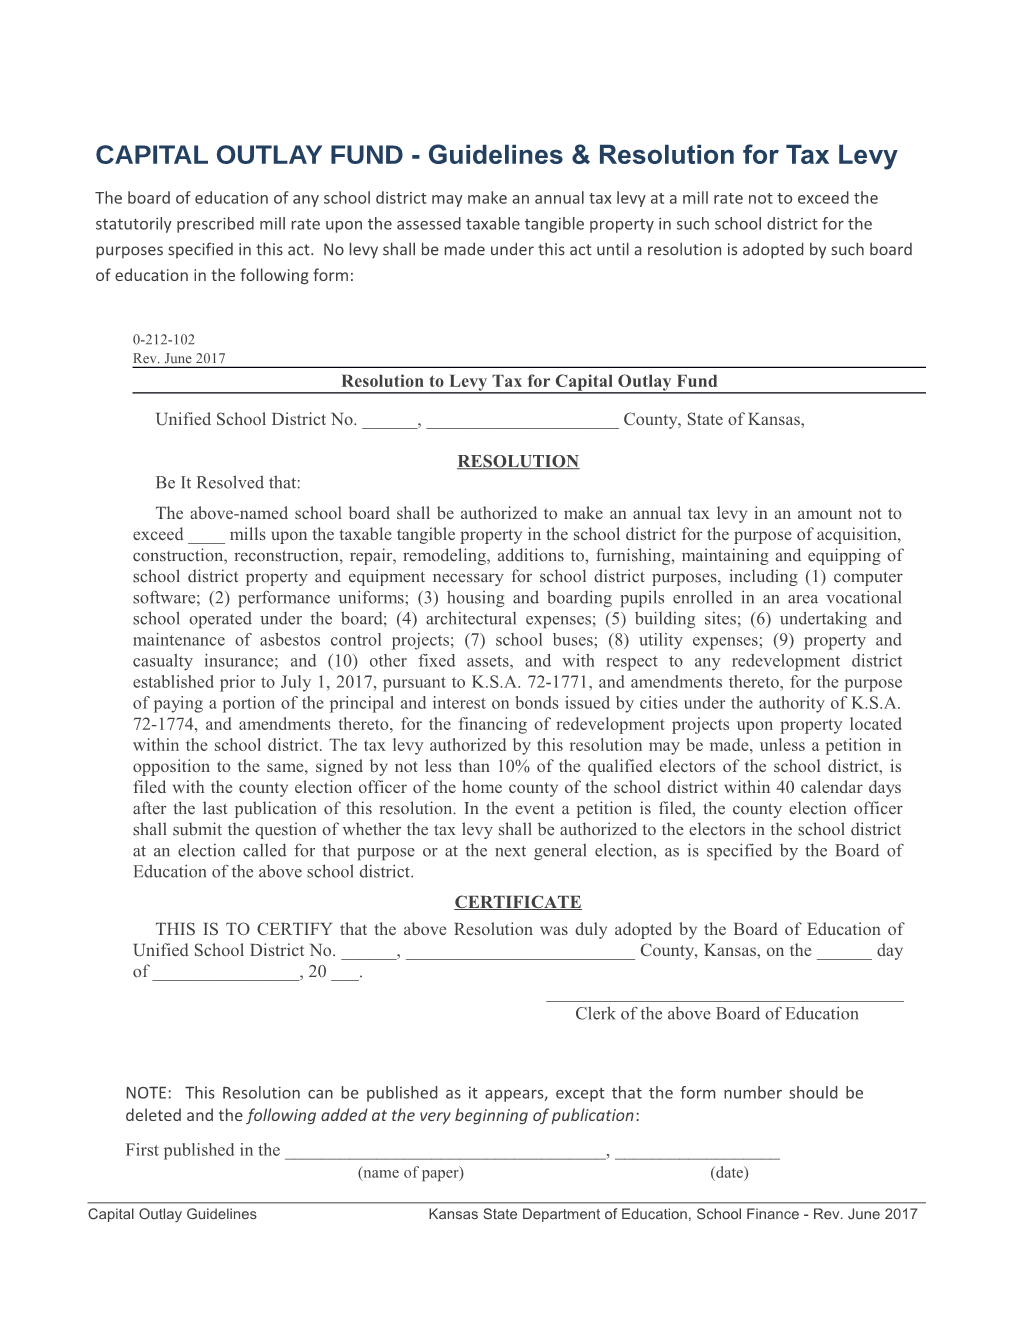 Capital Outlay Fund- Guidelines & Resolution for Tax Levy